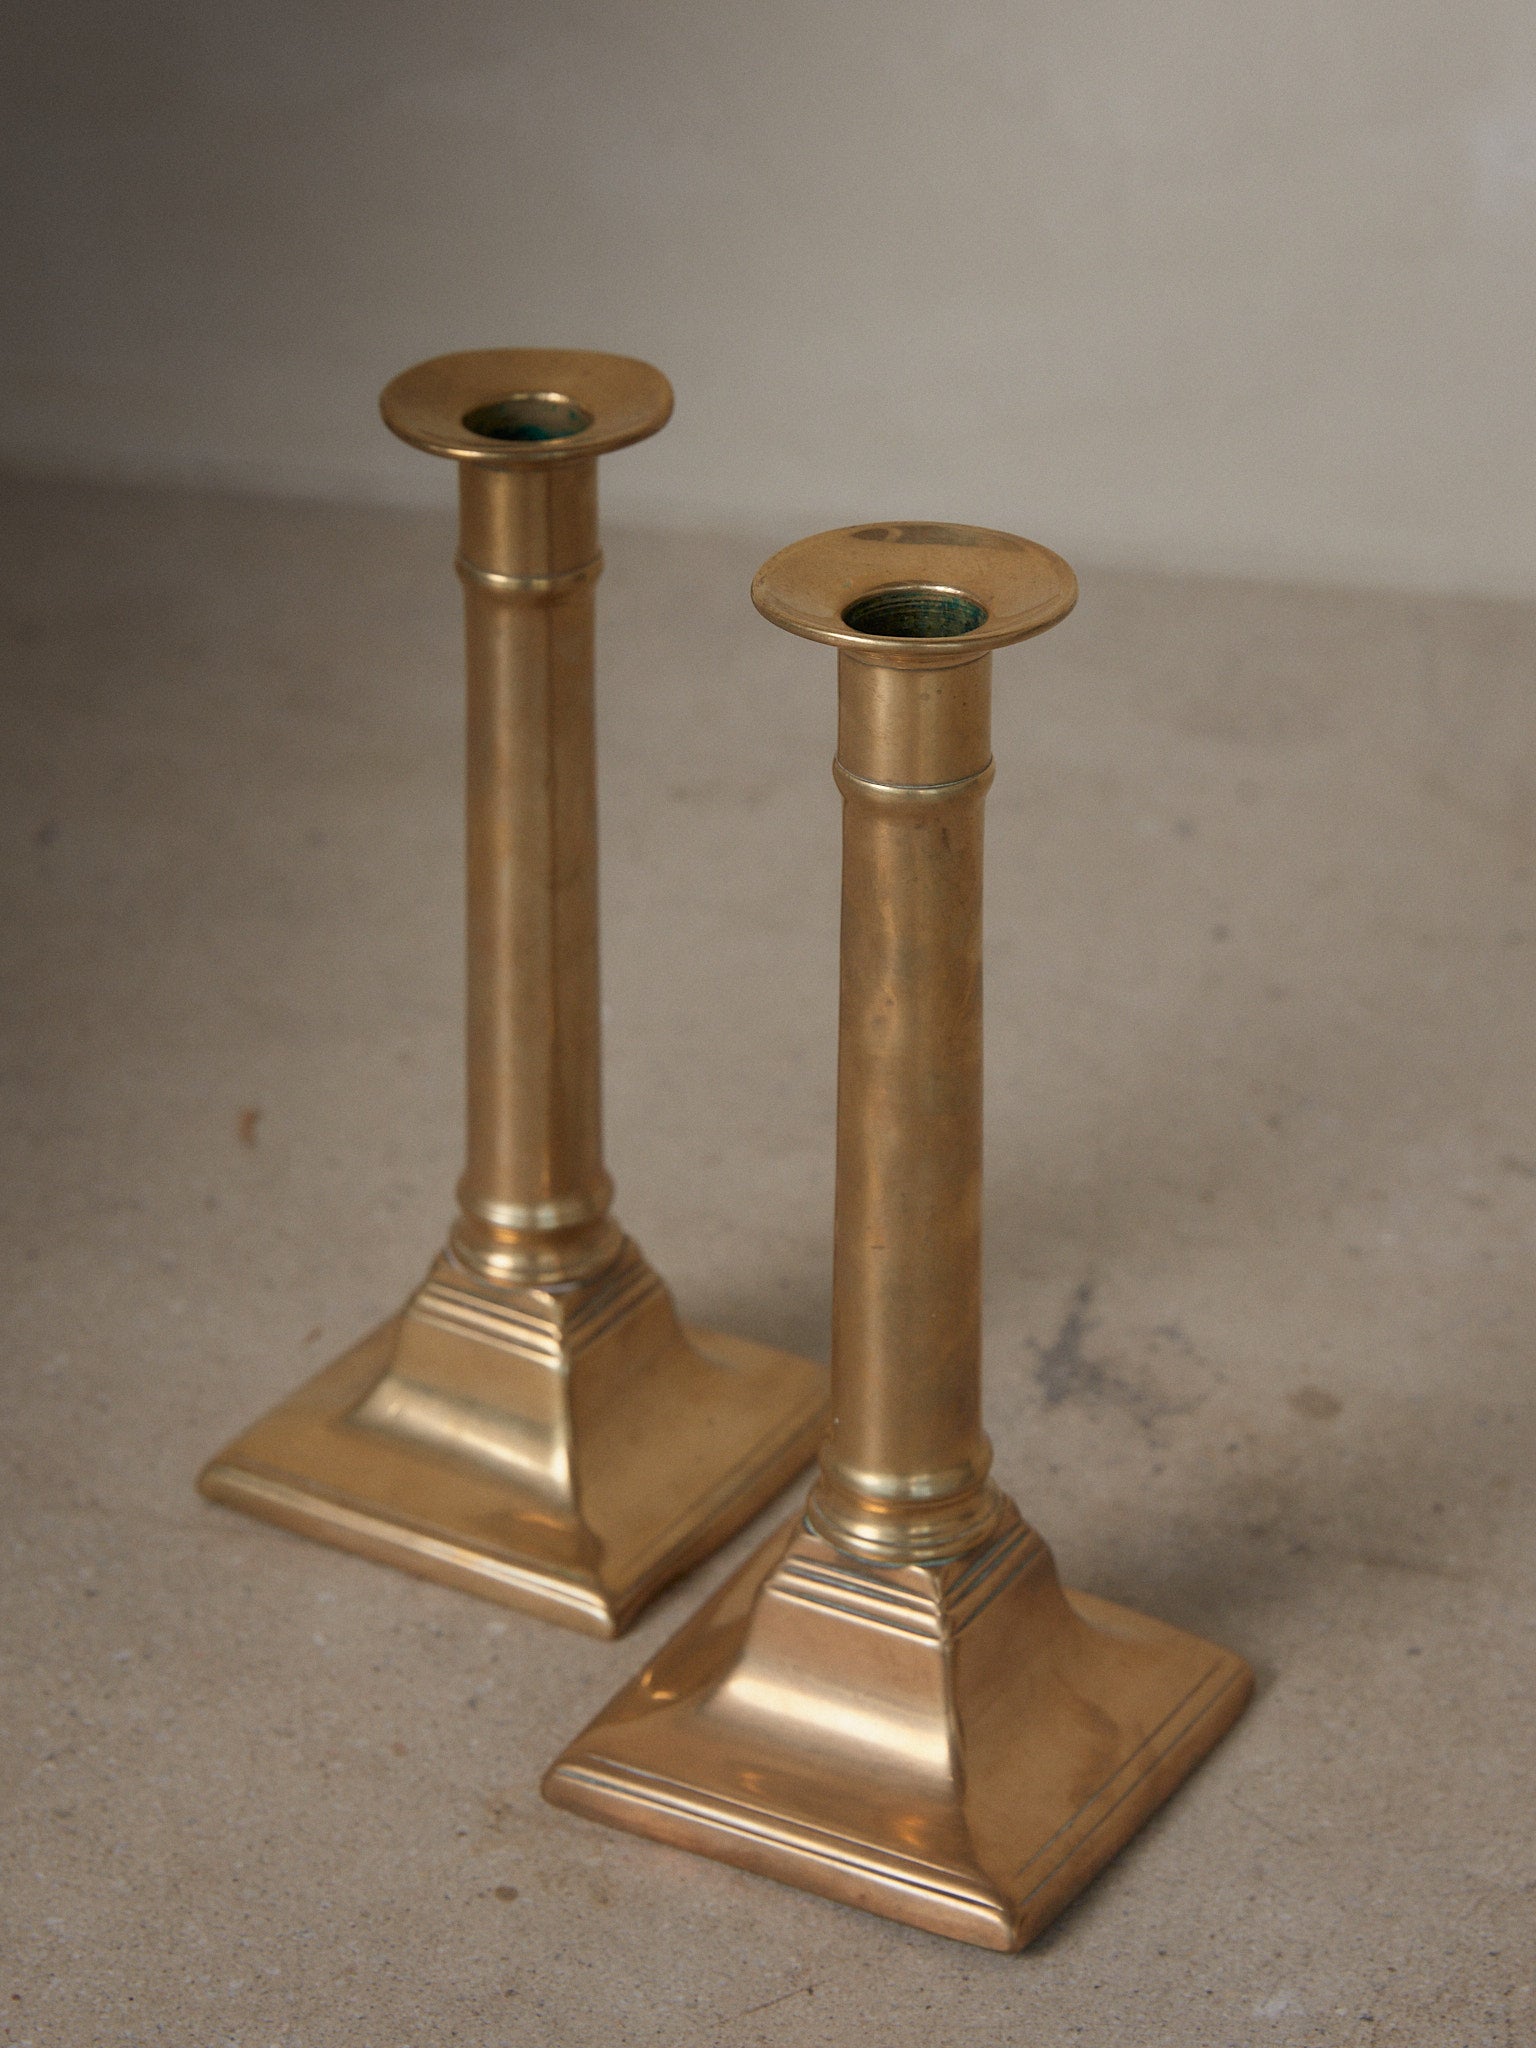 Vintage Push Up Candle Holders. Rare vintage find. Pair of stately 19th century English column candle holders with push up mechanism in brass.